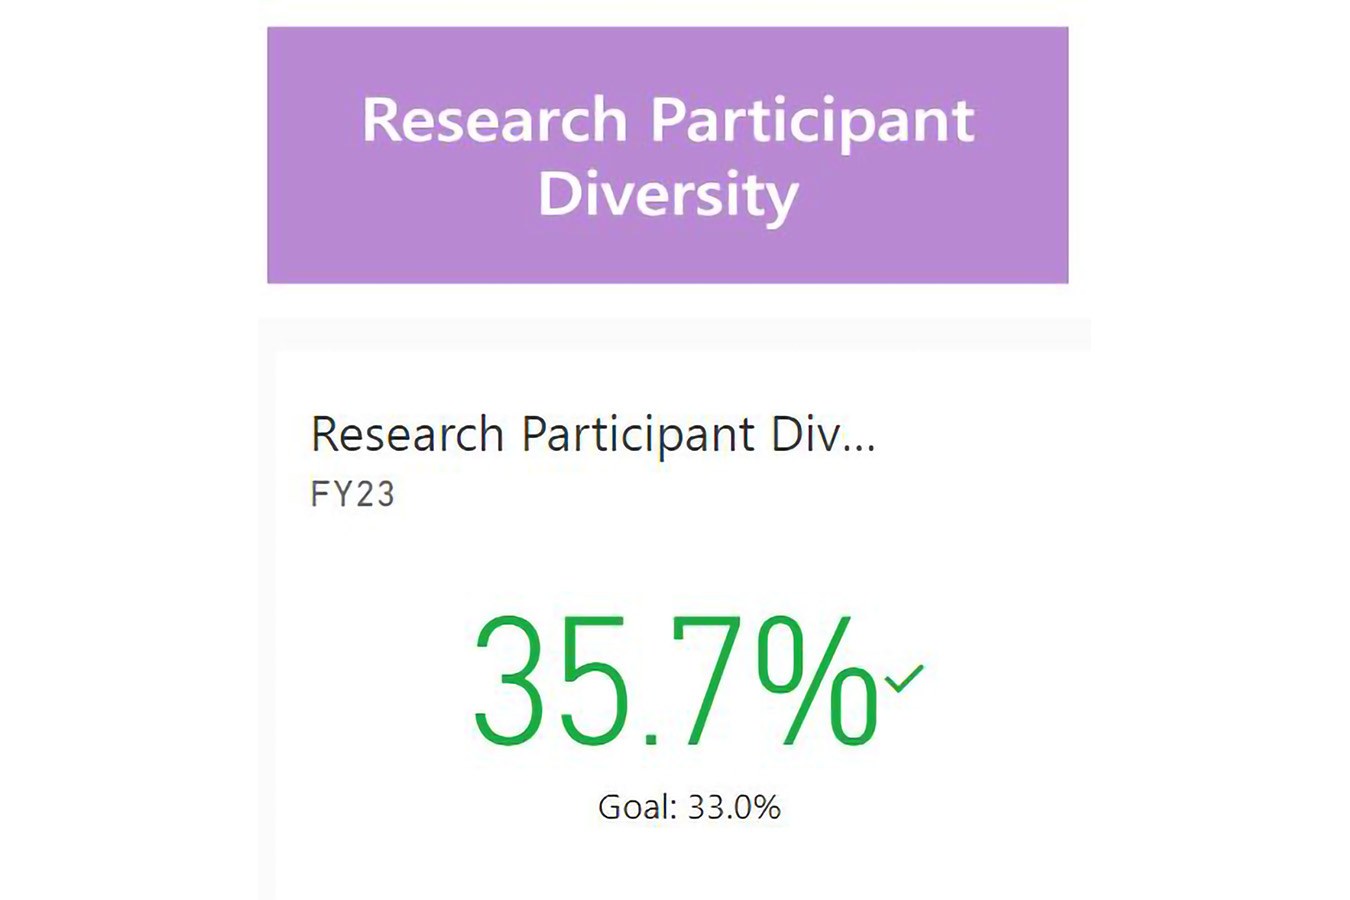 Research participant diversity is at 35.7%, exceeding the goal of 33.0%